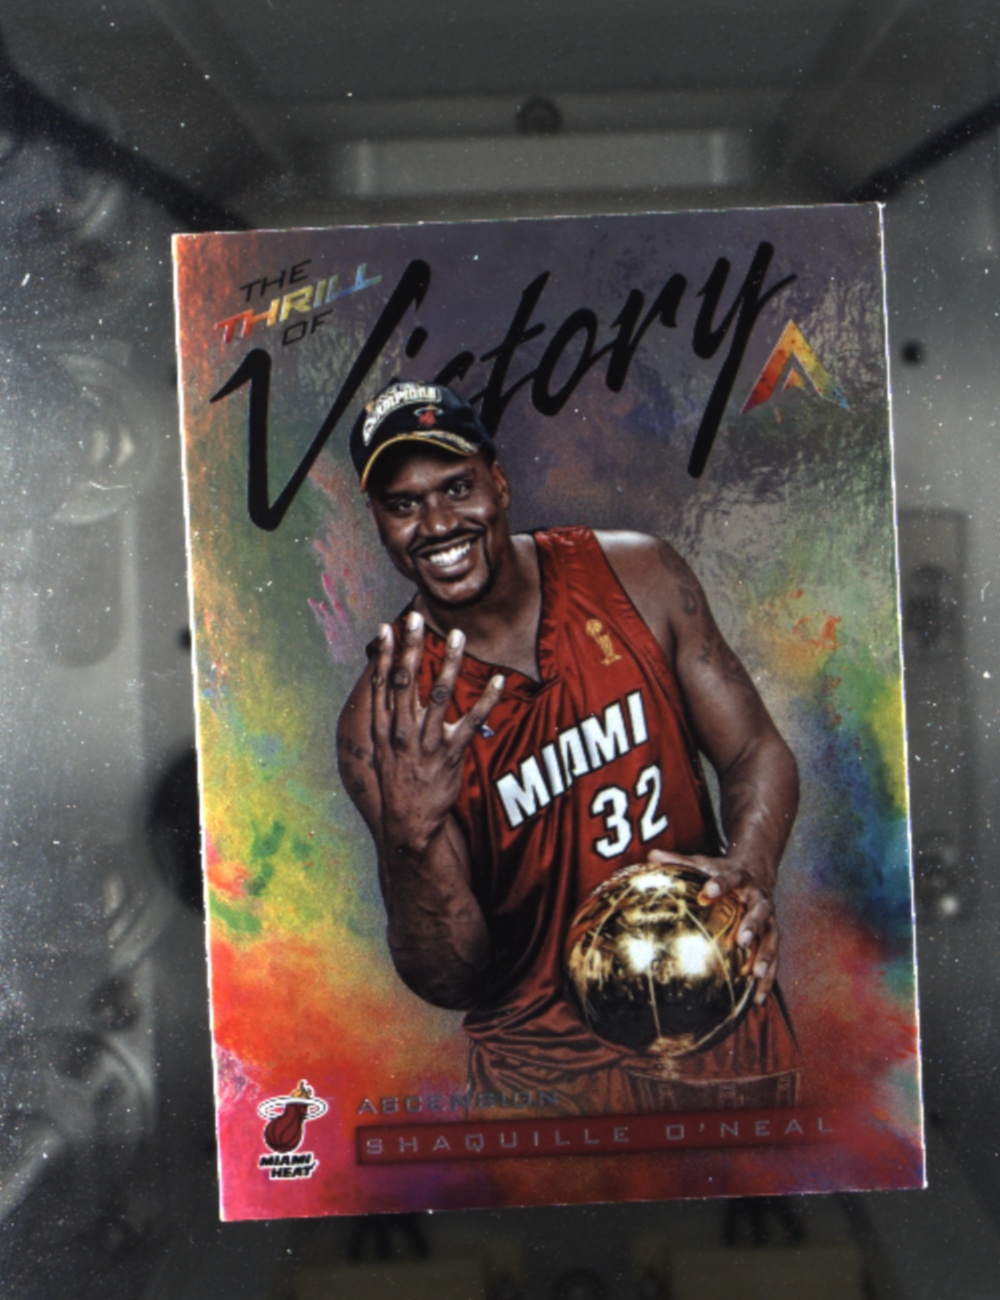 【UCS拍卖 wl0106】2017-18 Panini Ascension 特卡 折射 Thrill of Victory - Shaquille O'Neal 沙奎尔-奥尼尔